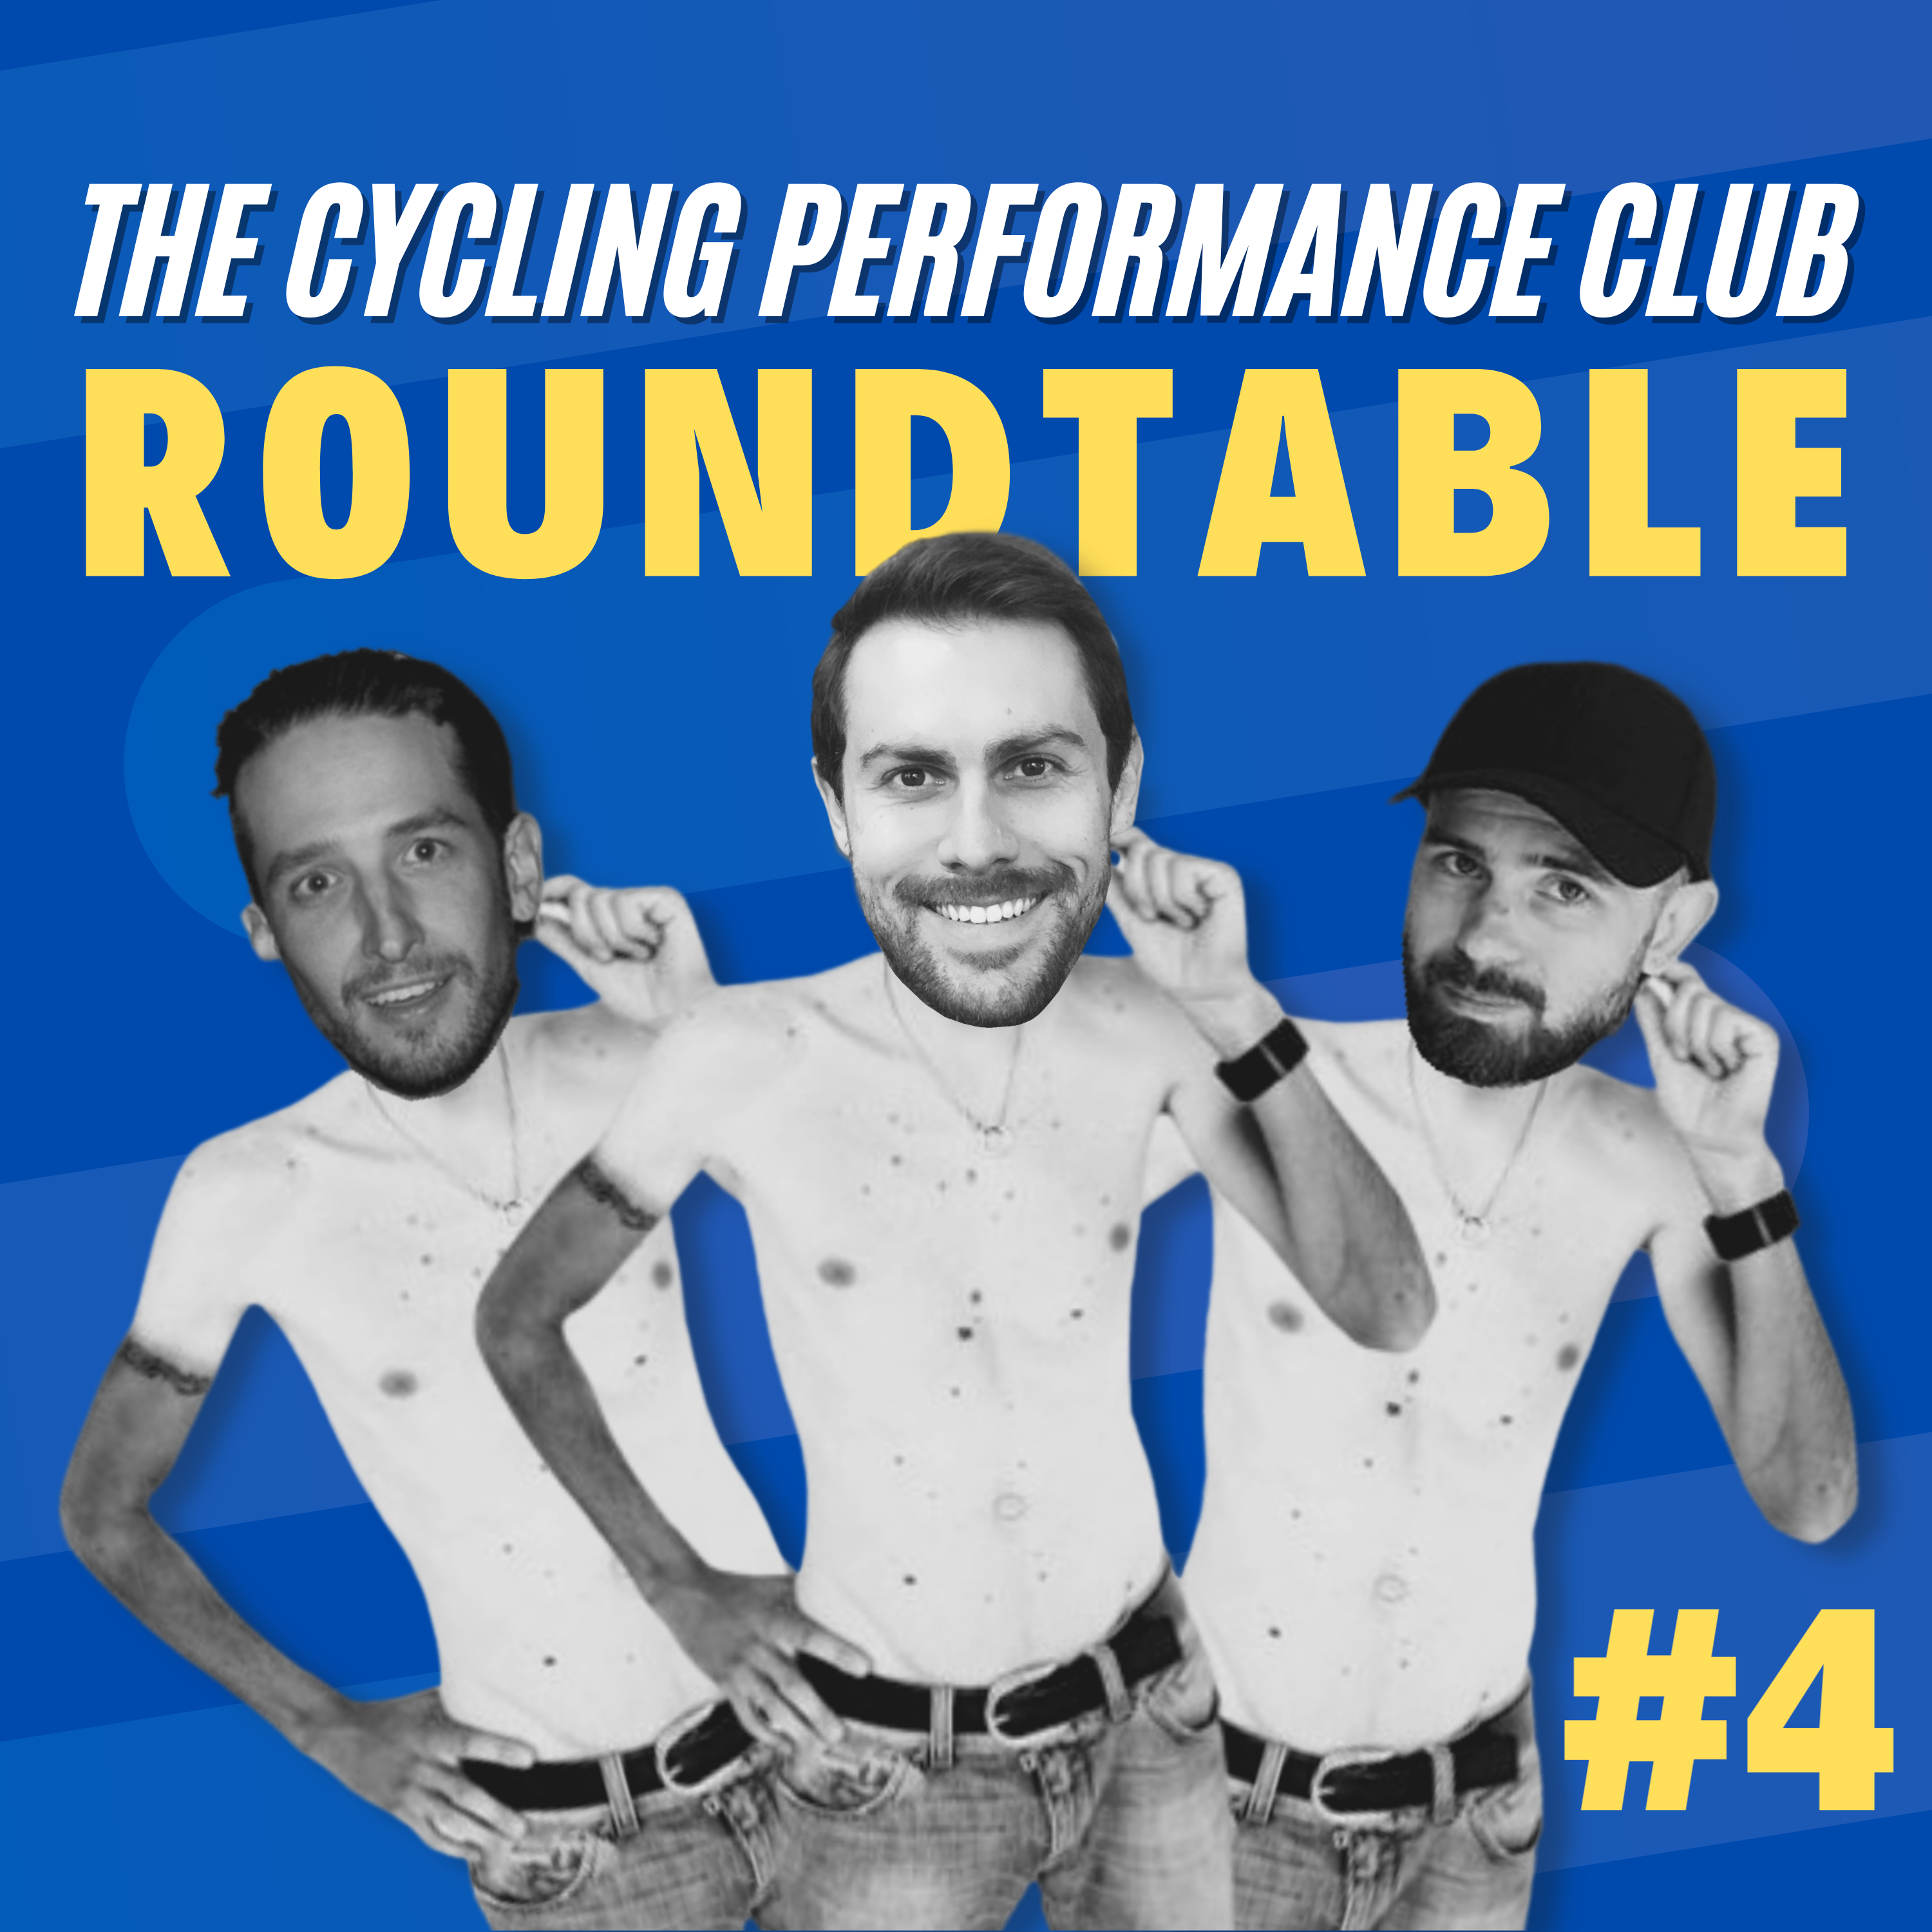 Roundtable #4 - Two scientists focus on preparation for a hot peak race